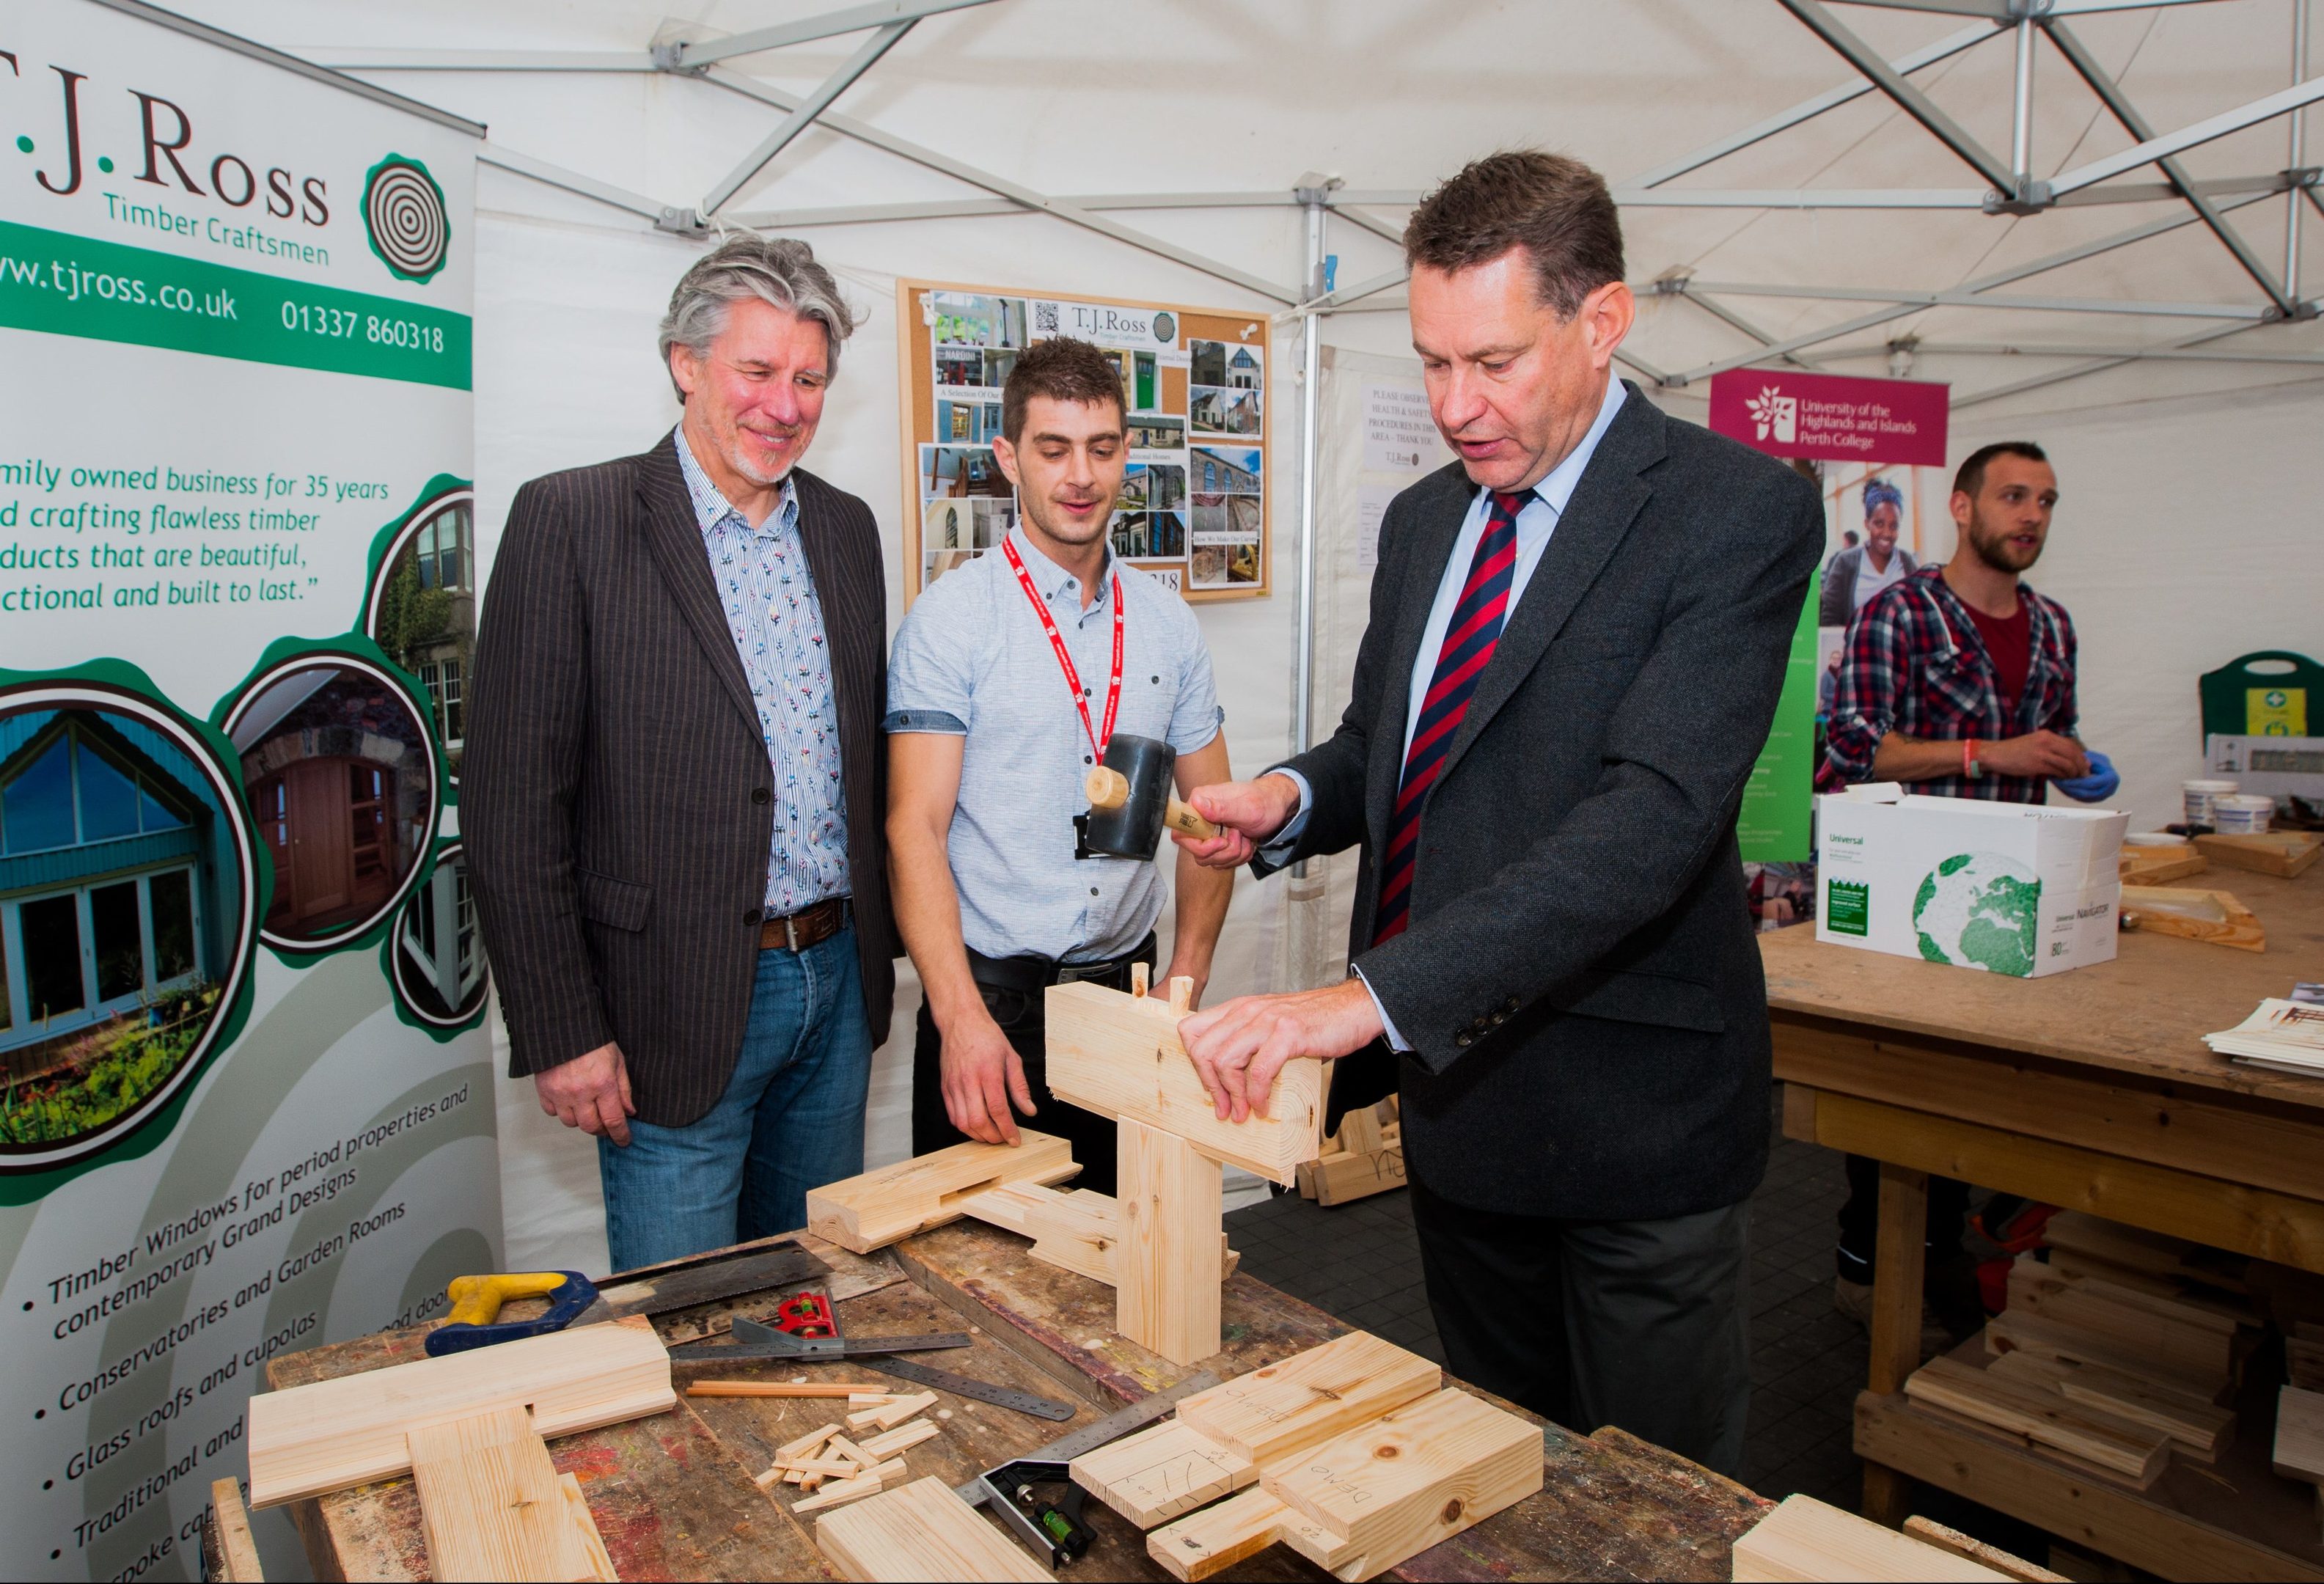 Picture shows left to right, Martin Richardson (owner of TJ Ross Joiners, John Daly (lecturer Perth College UHI (joinery) and Murdo Fraser MSP trying his hand at joinery.